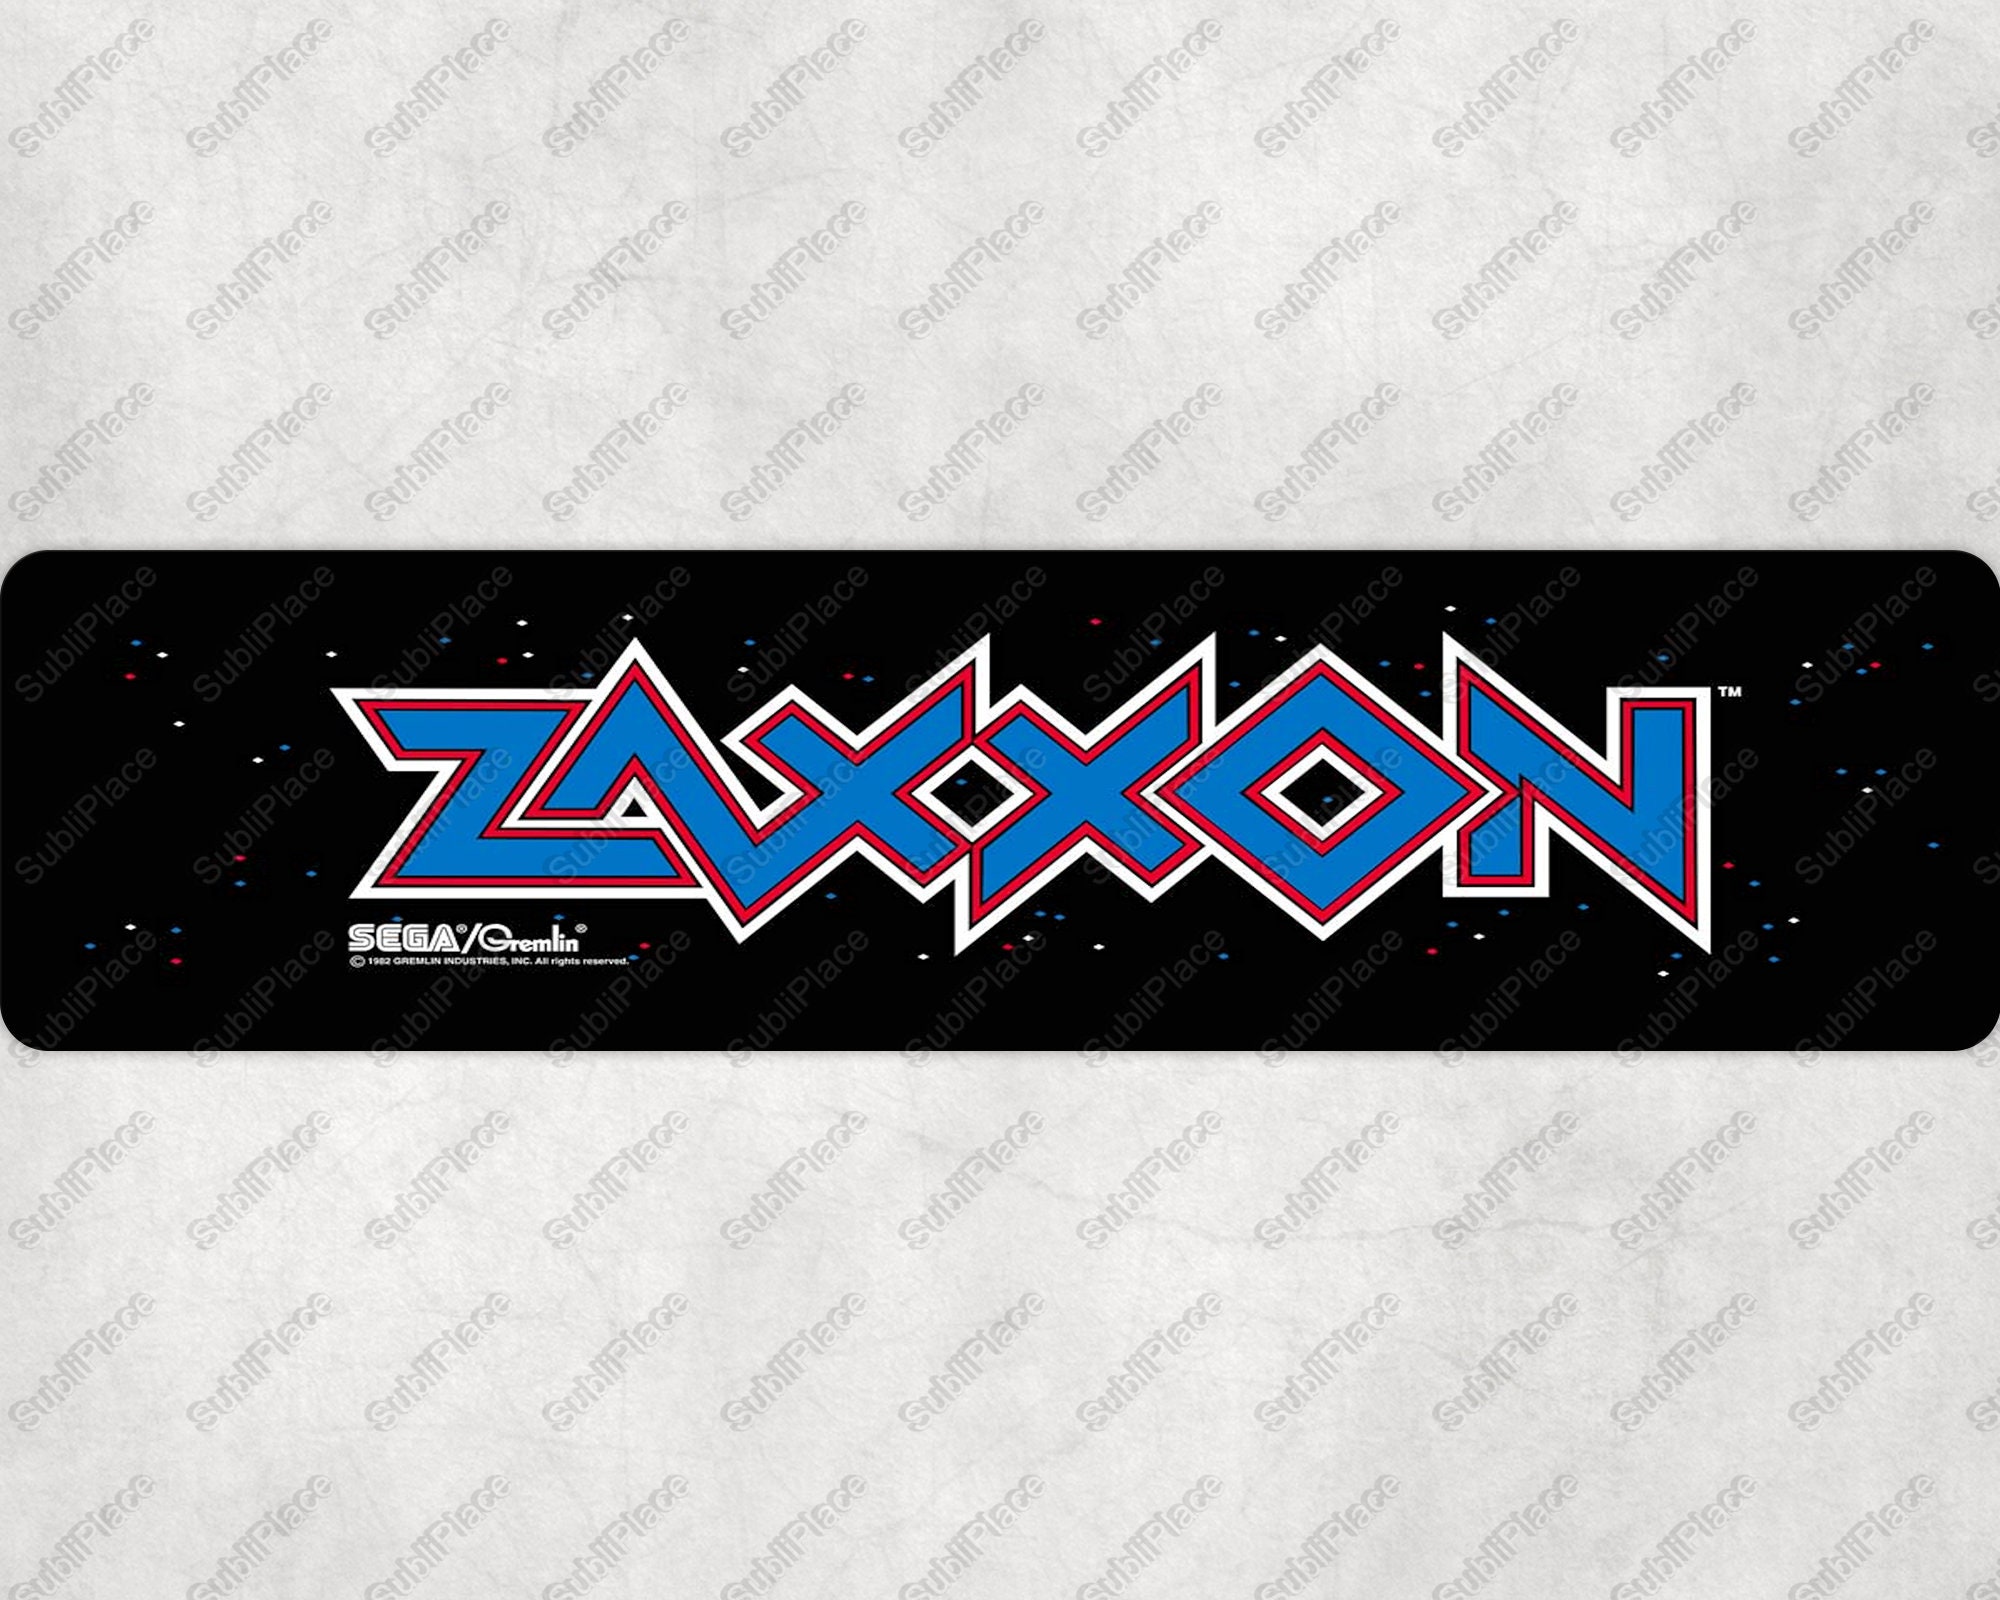 no holes Image is sublimated onto the plate High gloss with rounded corners Zaxxon Arcade Game 400 Screenshot 8x10 Metal Plate